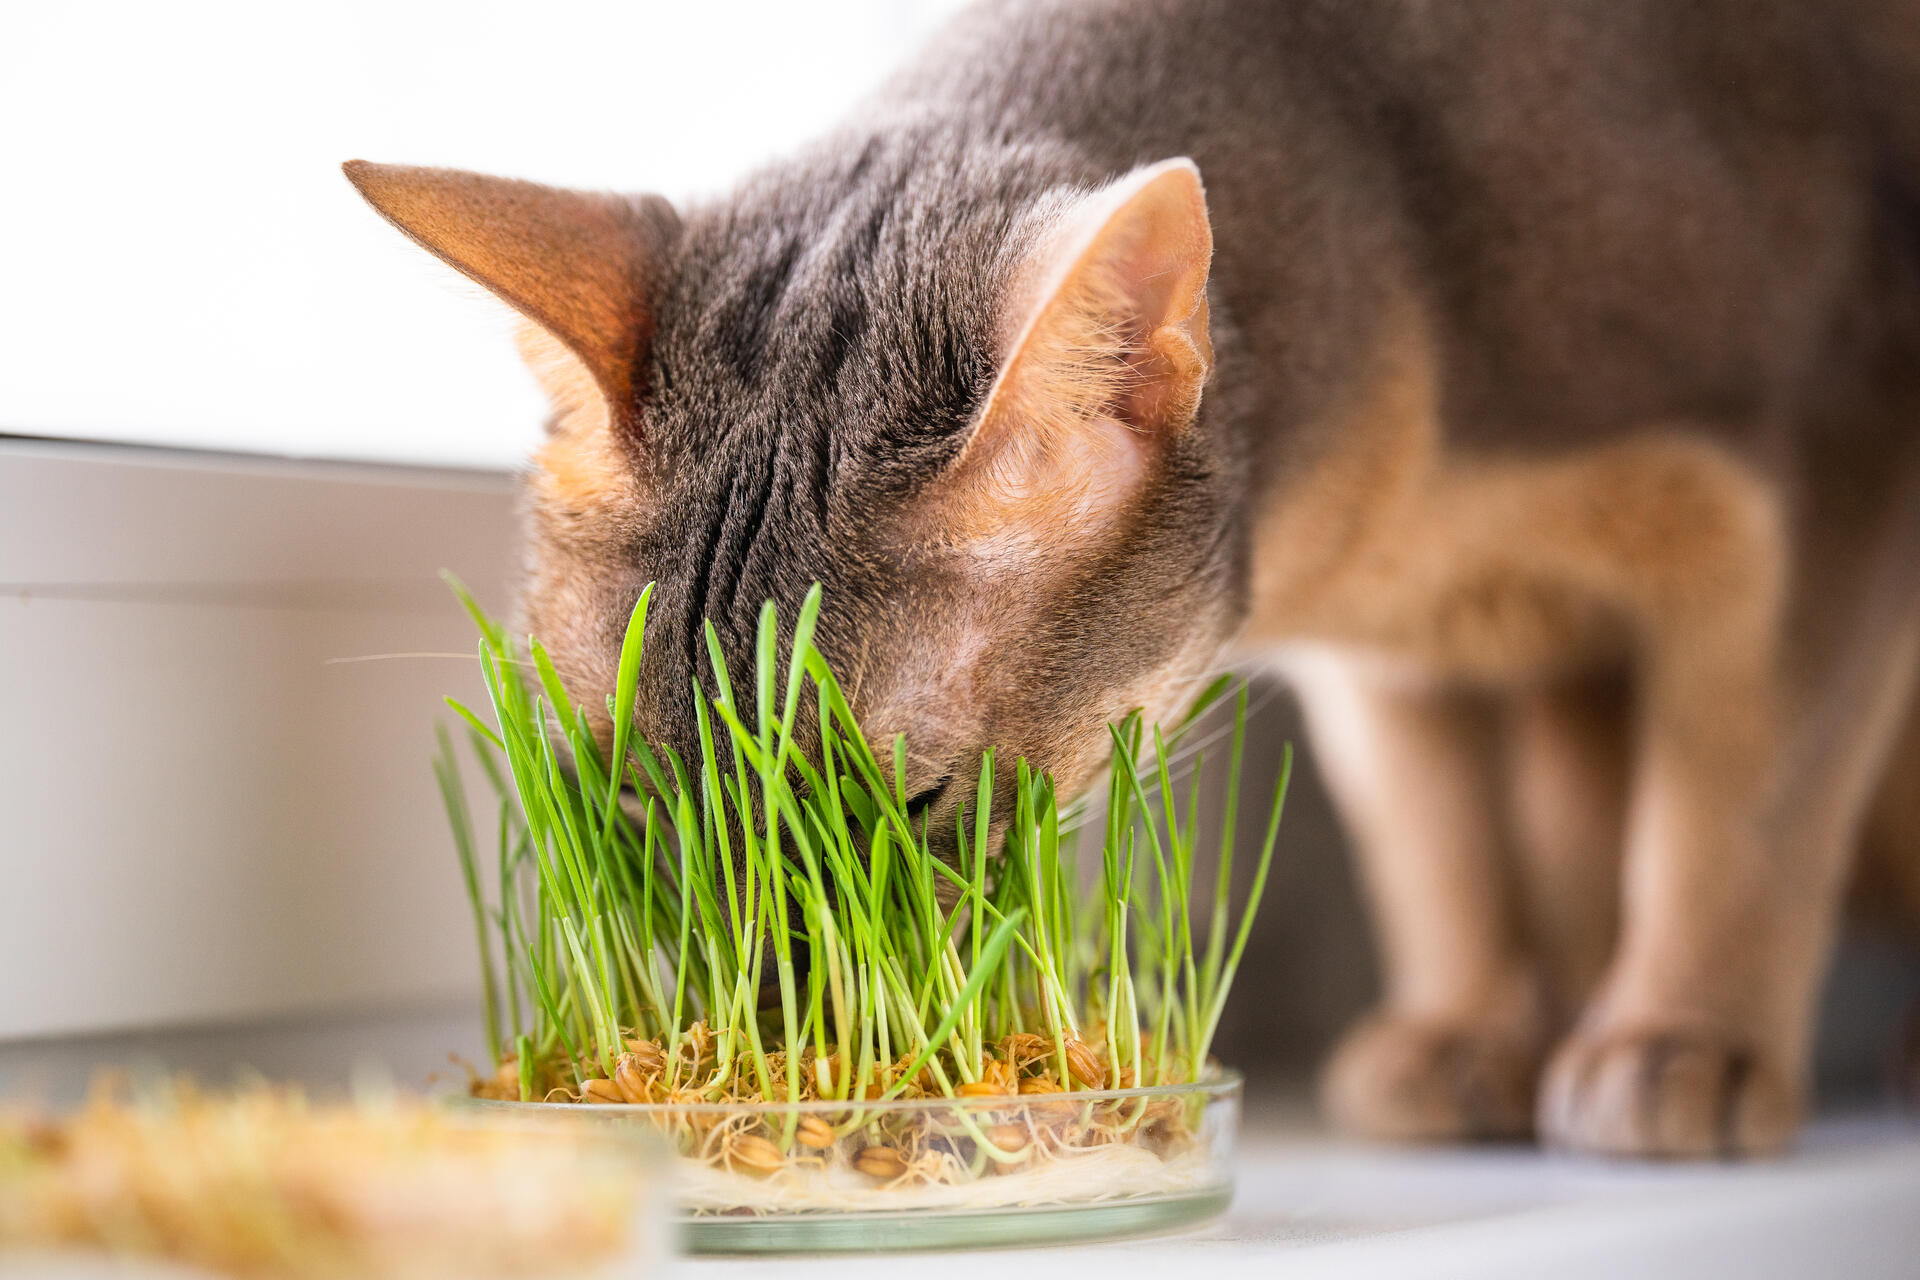 A cat eating grass from a potted plant